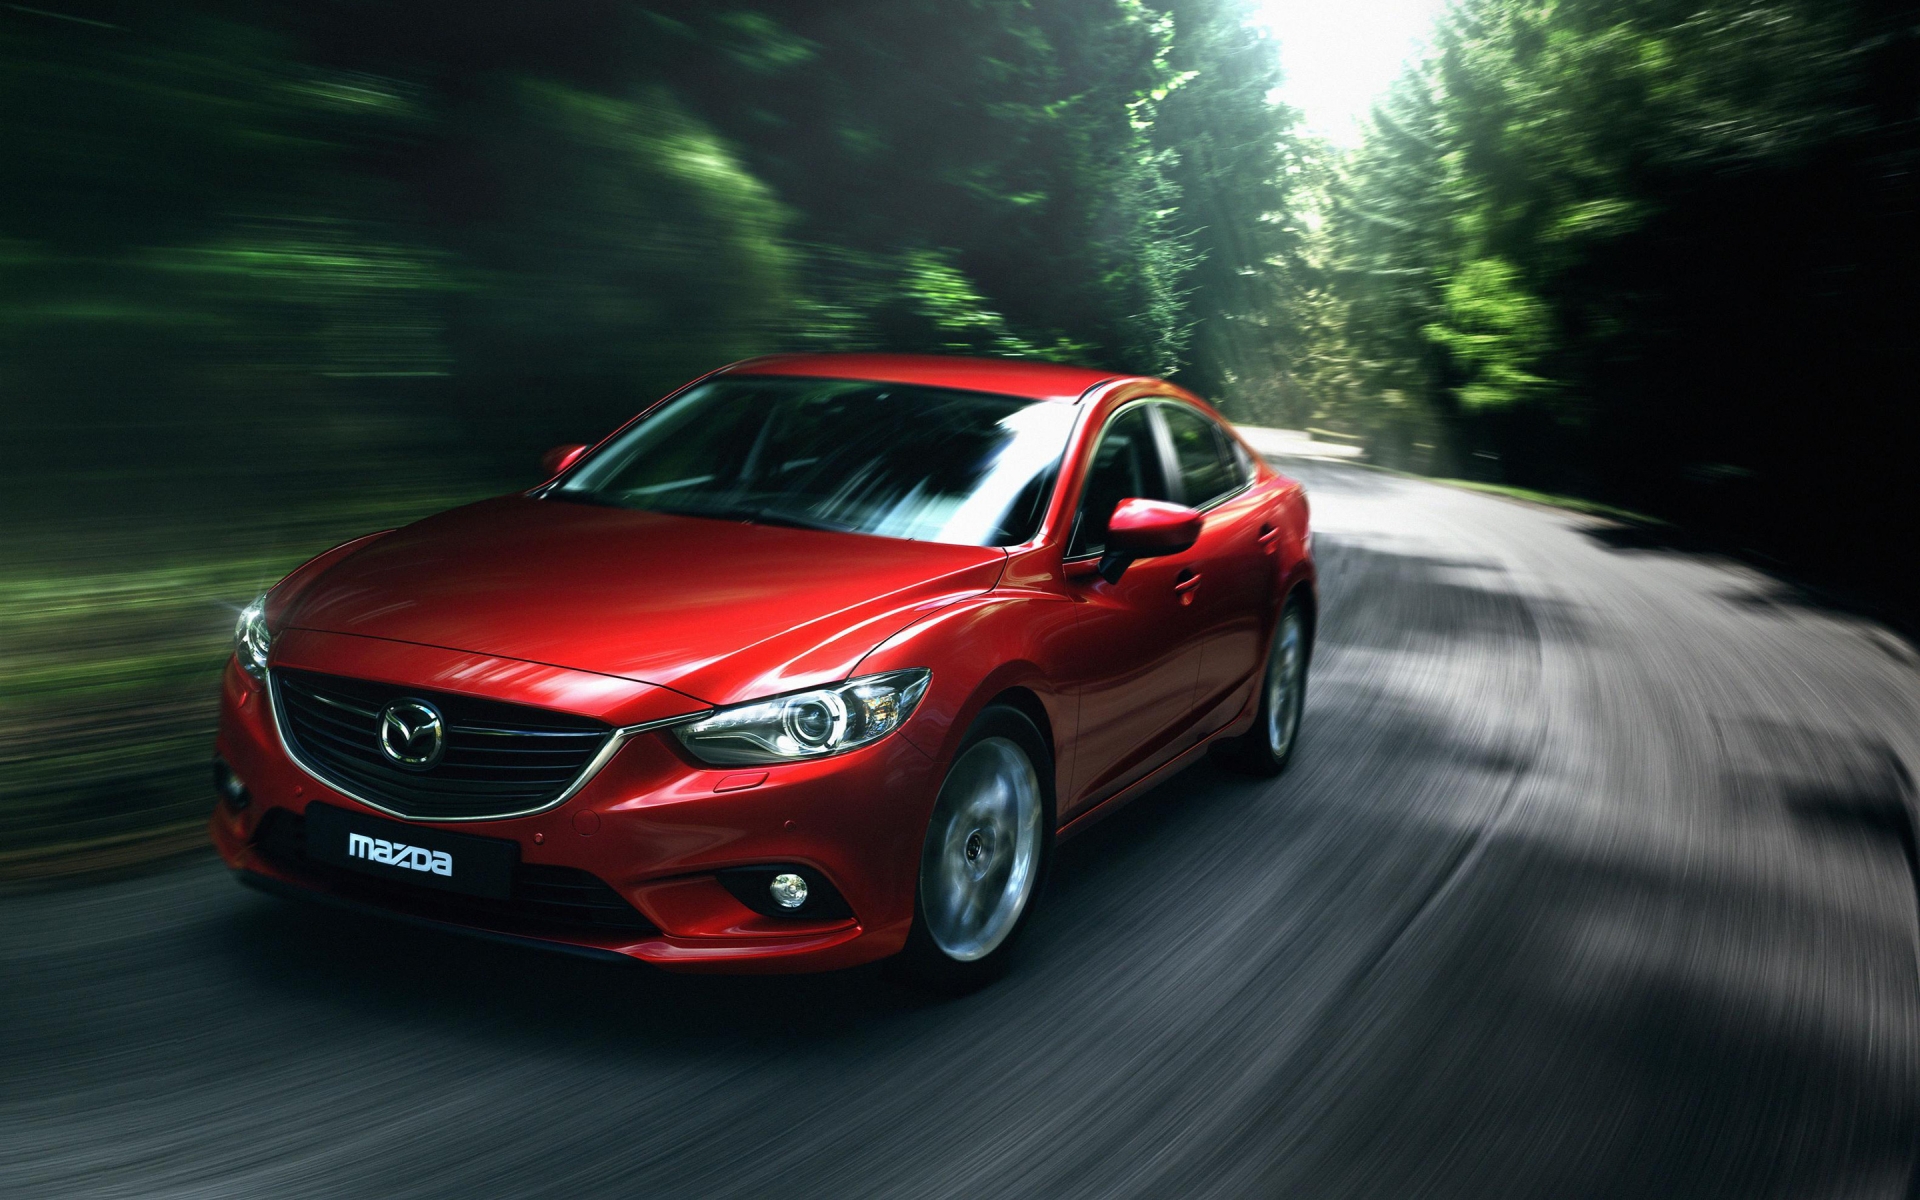 Gorgeous Red Mazda 6 for 1920 x 1200 widescreen resolution